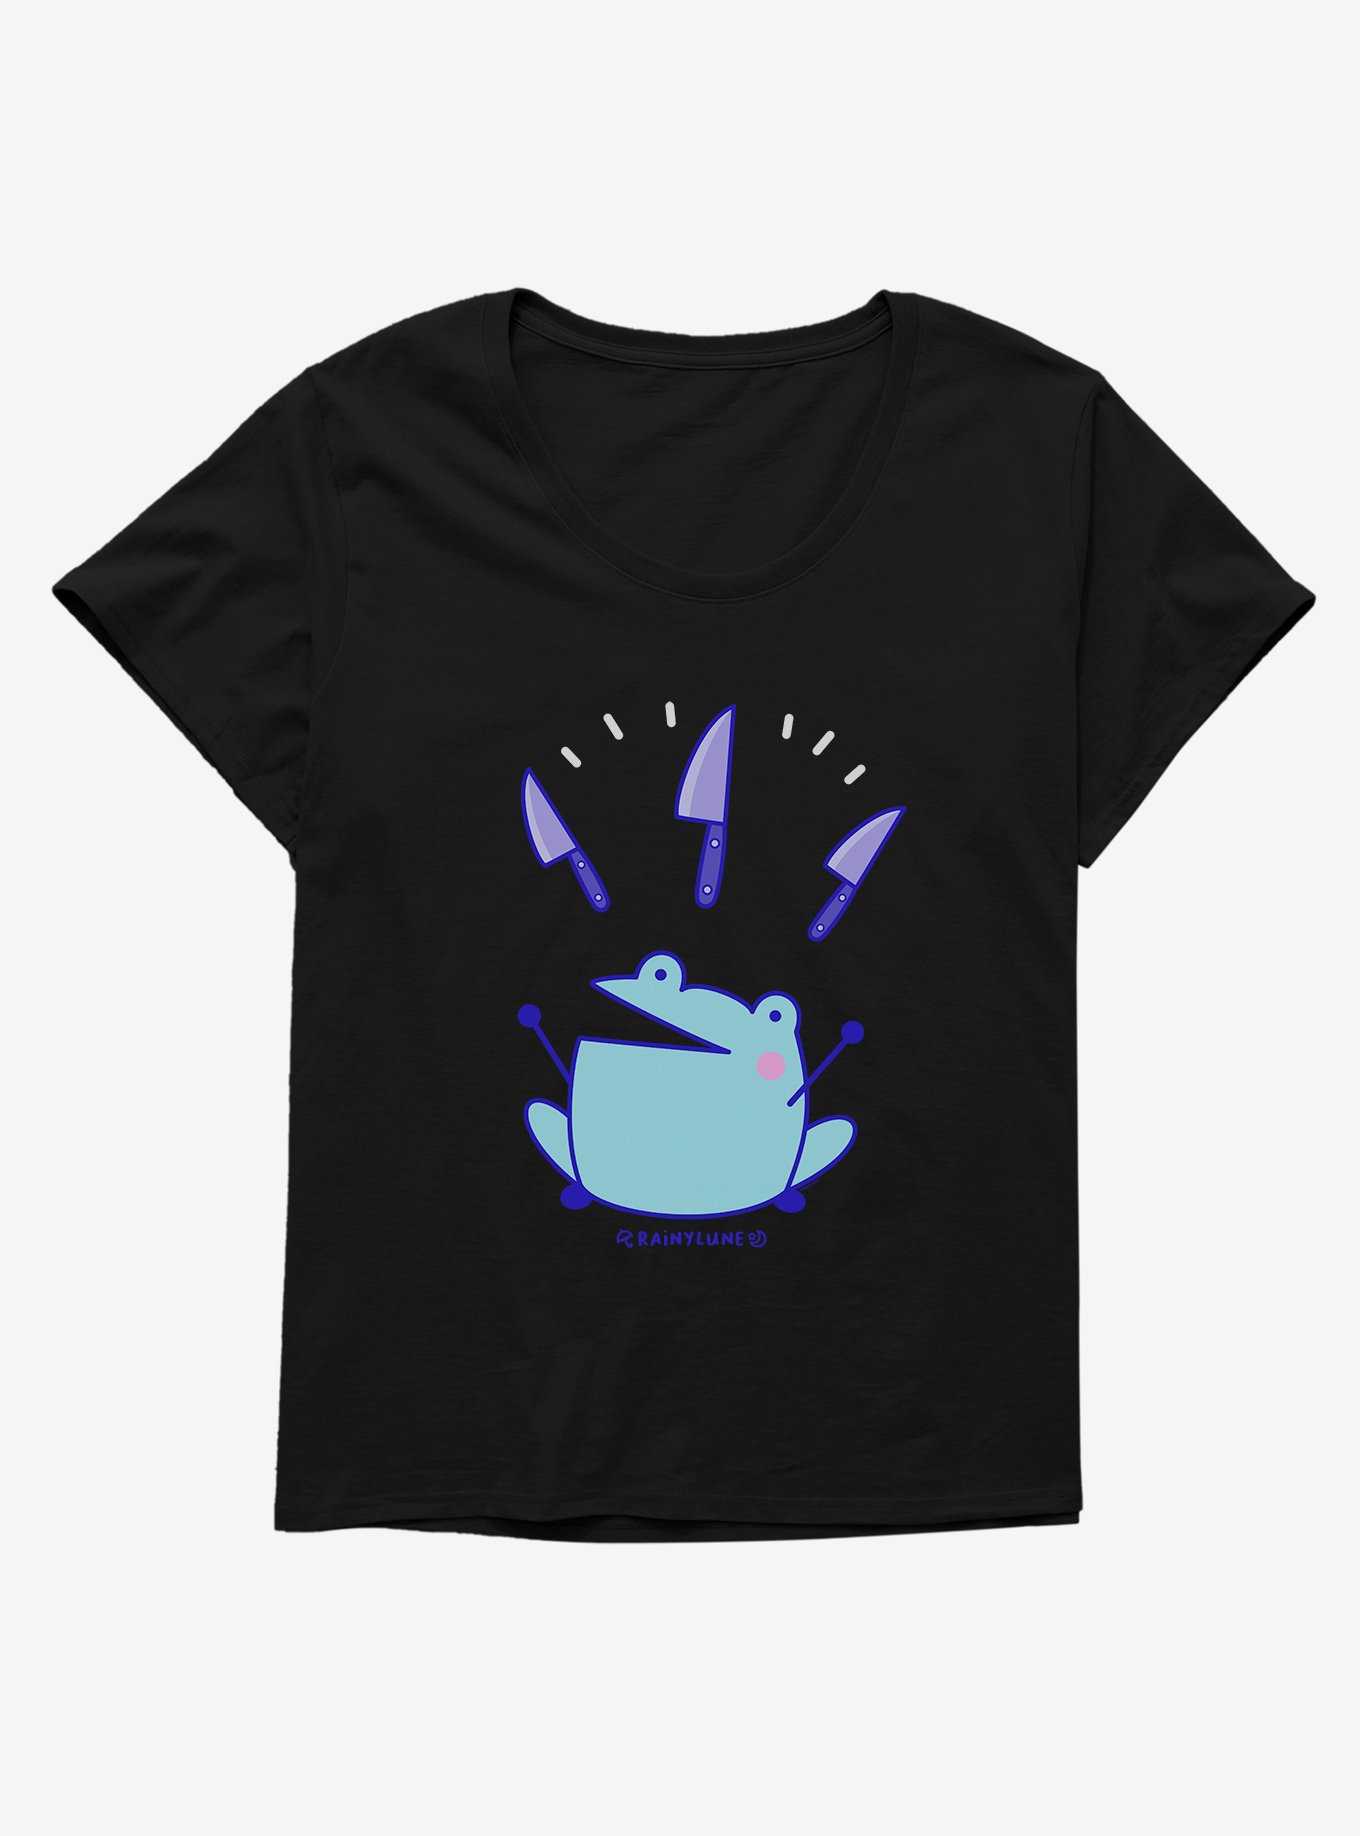 Rainylune Son The Frog Knives Womens T-Shirt Plus Size, , hi-res